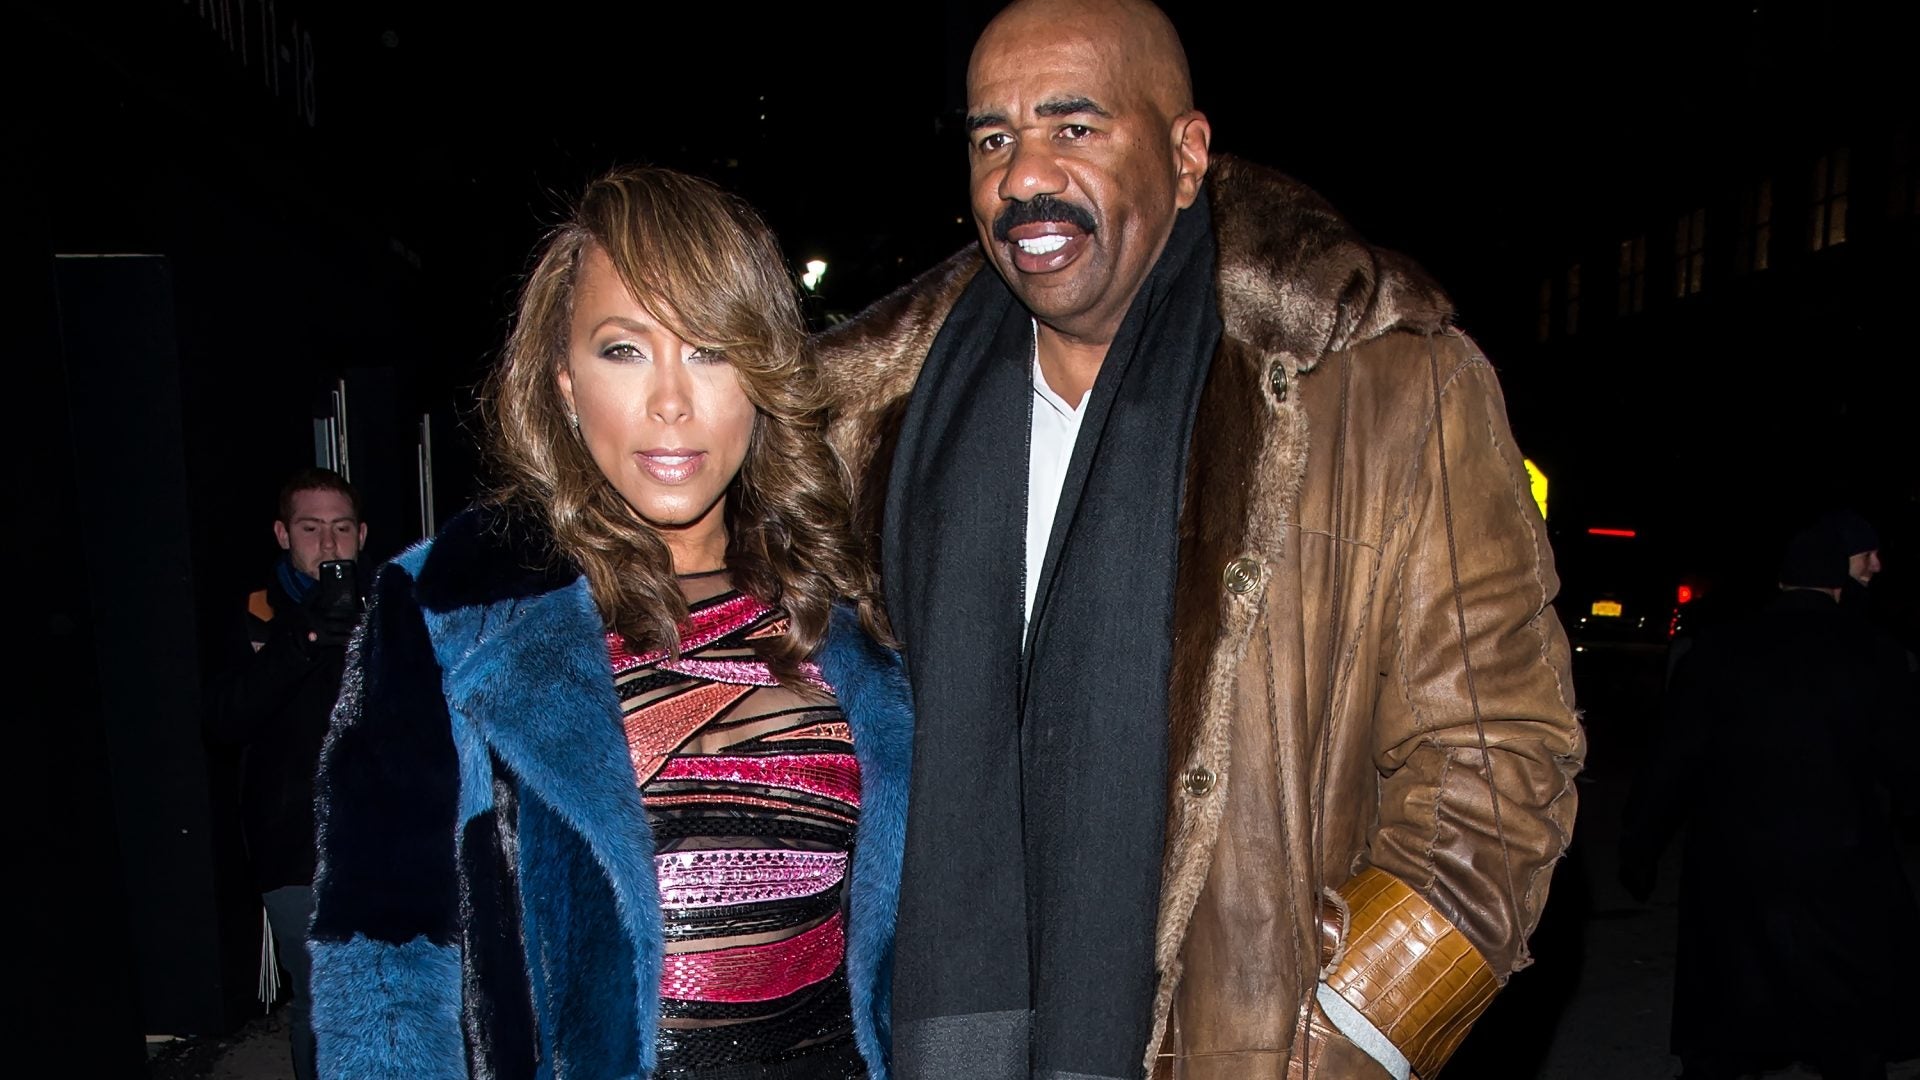 Steve Harvey Gushes Over His Wife During Acceptance Speech: 'I Love You Marjorie Harvey'